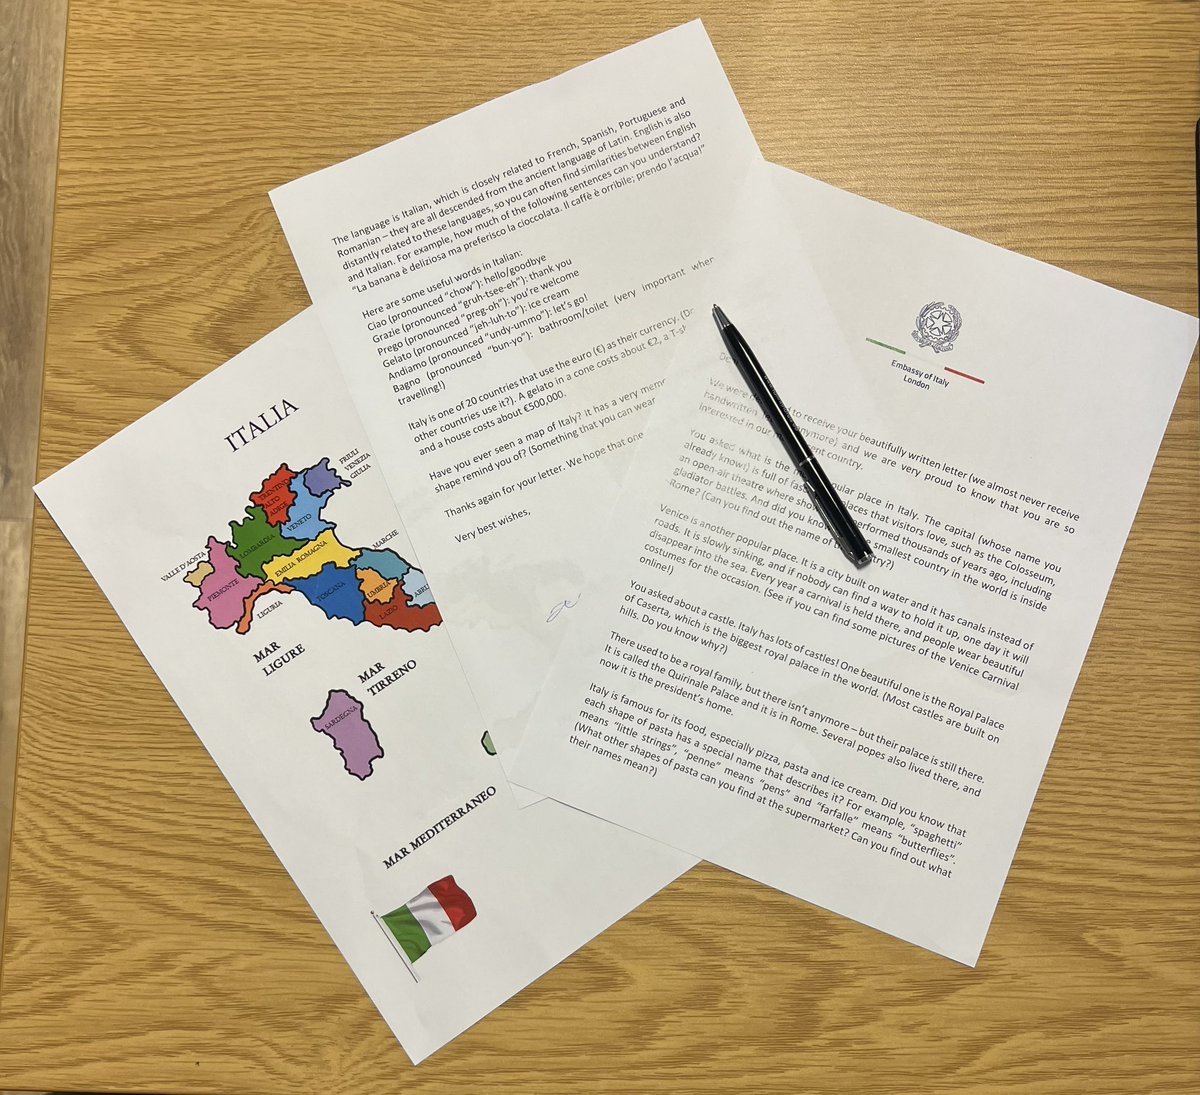 We were delighted to receive this lovely handwritten letter📝 from a young student who was curious to find out interesting information about Italy 🇮🇹Of course we were only too happy to reply with some fascinating facts ✍️ #piccolifans